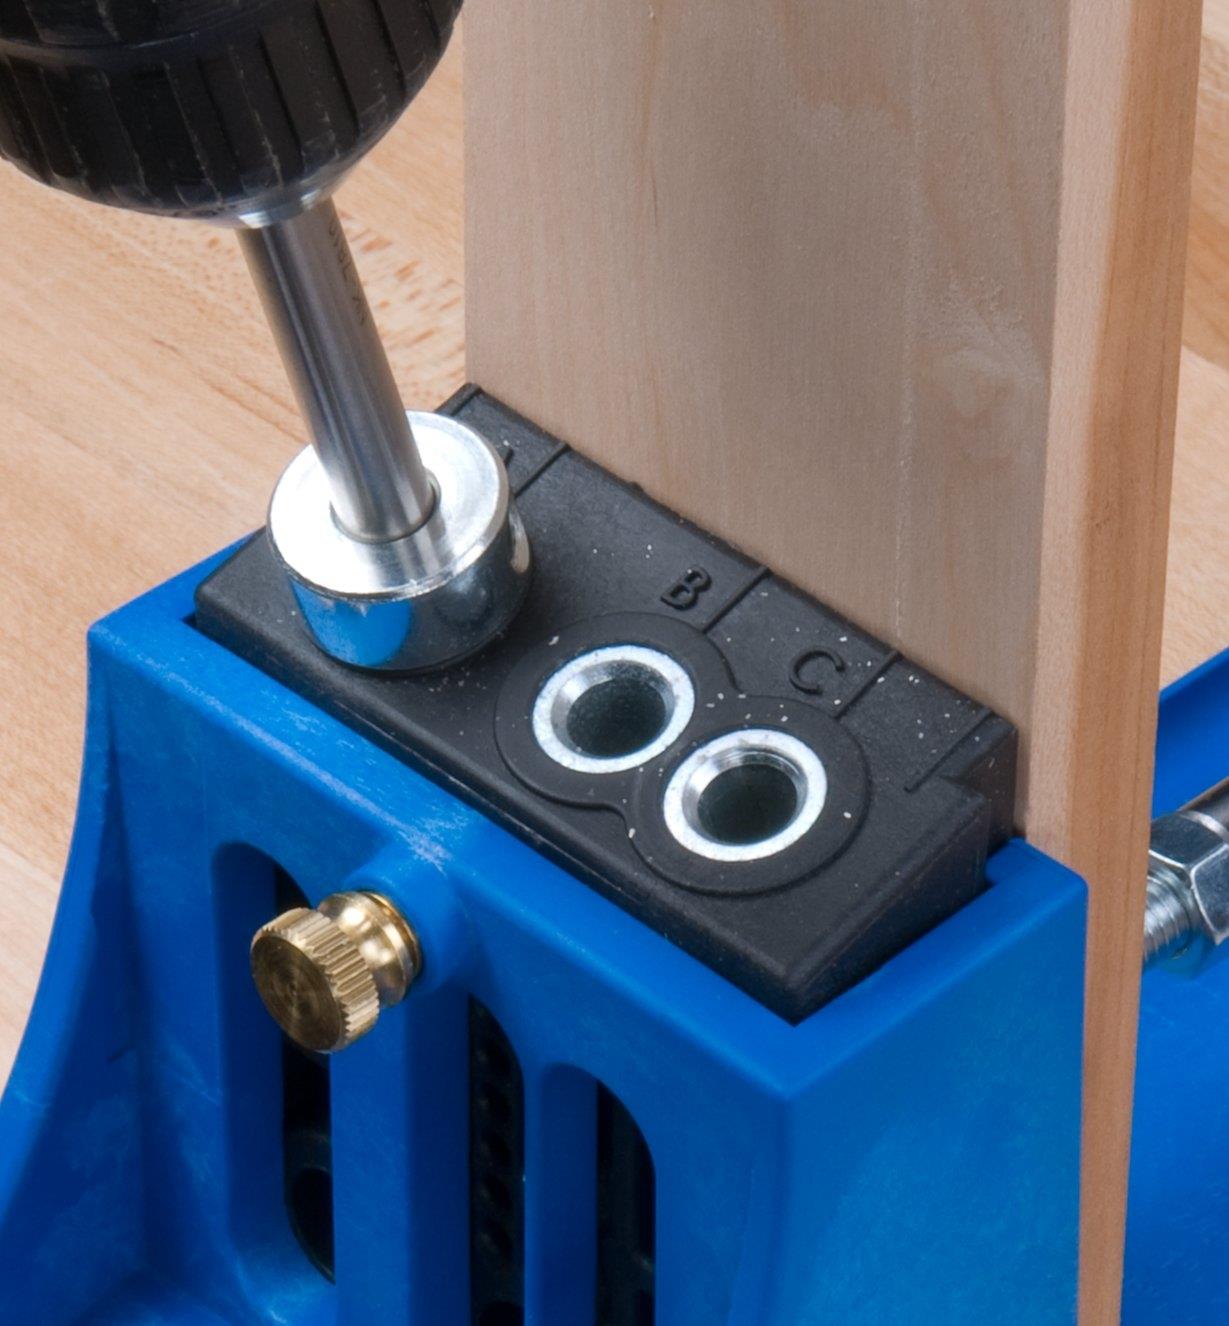 Using the guide to drill a pocket hole in a board